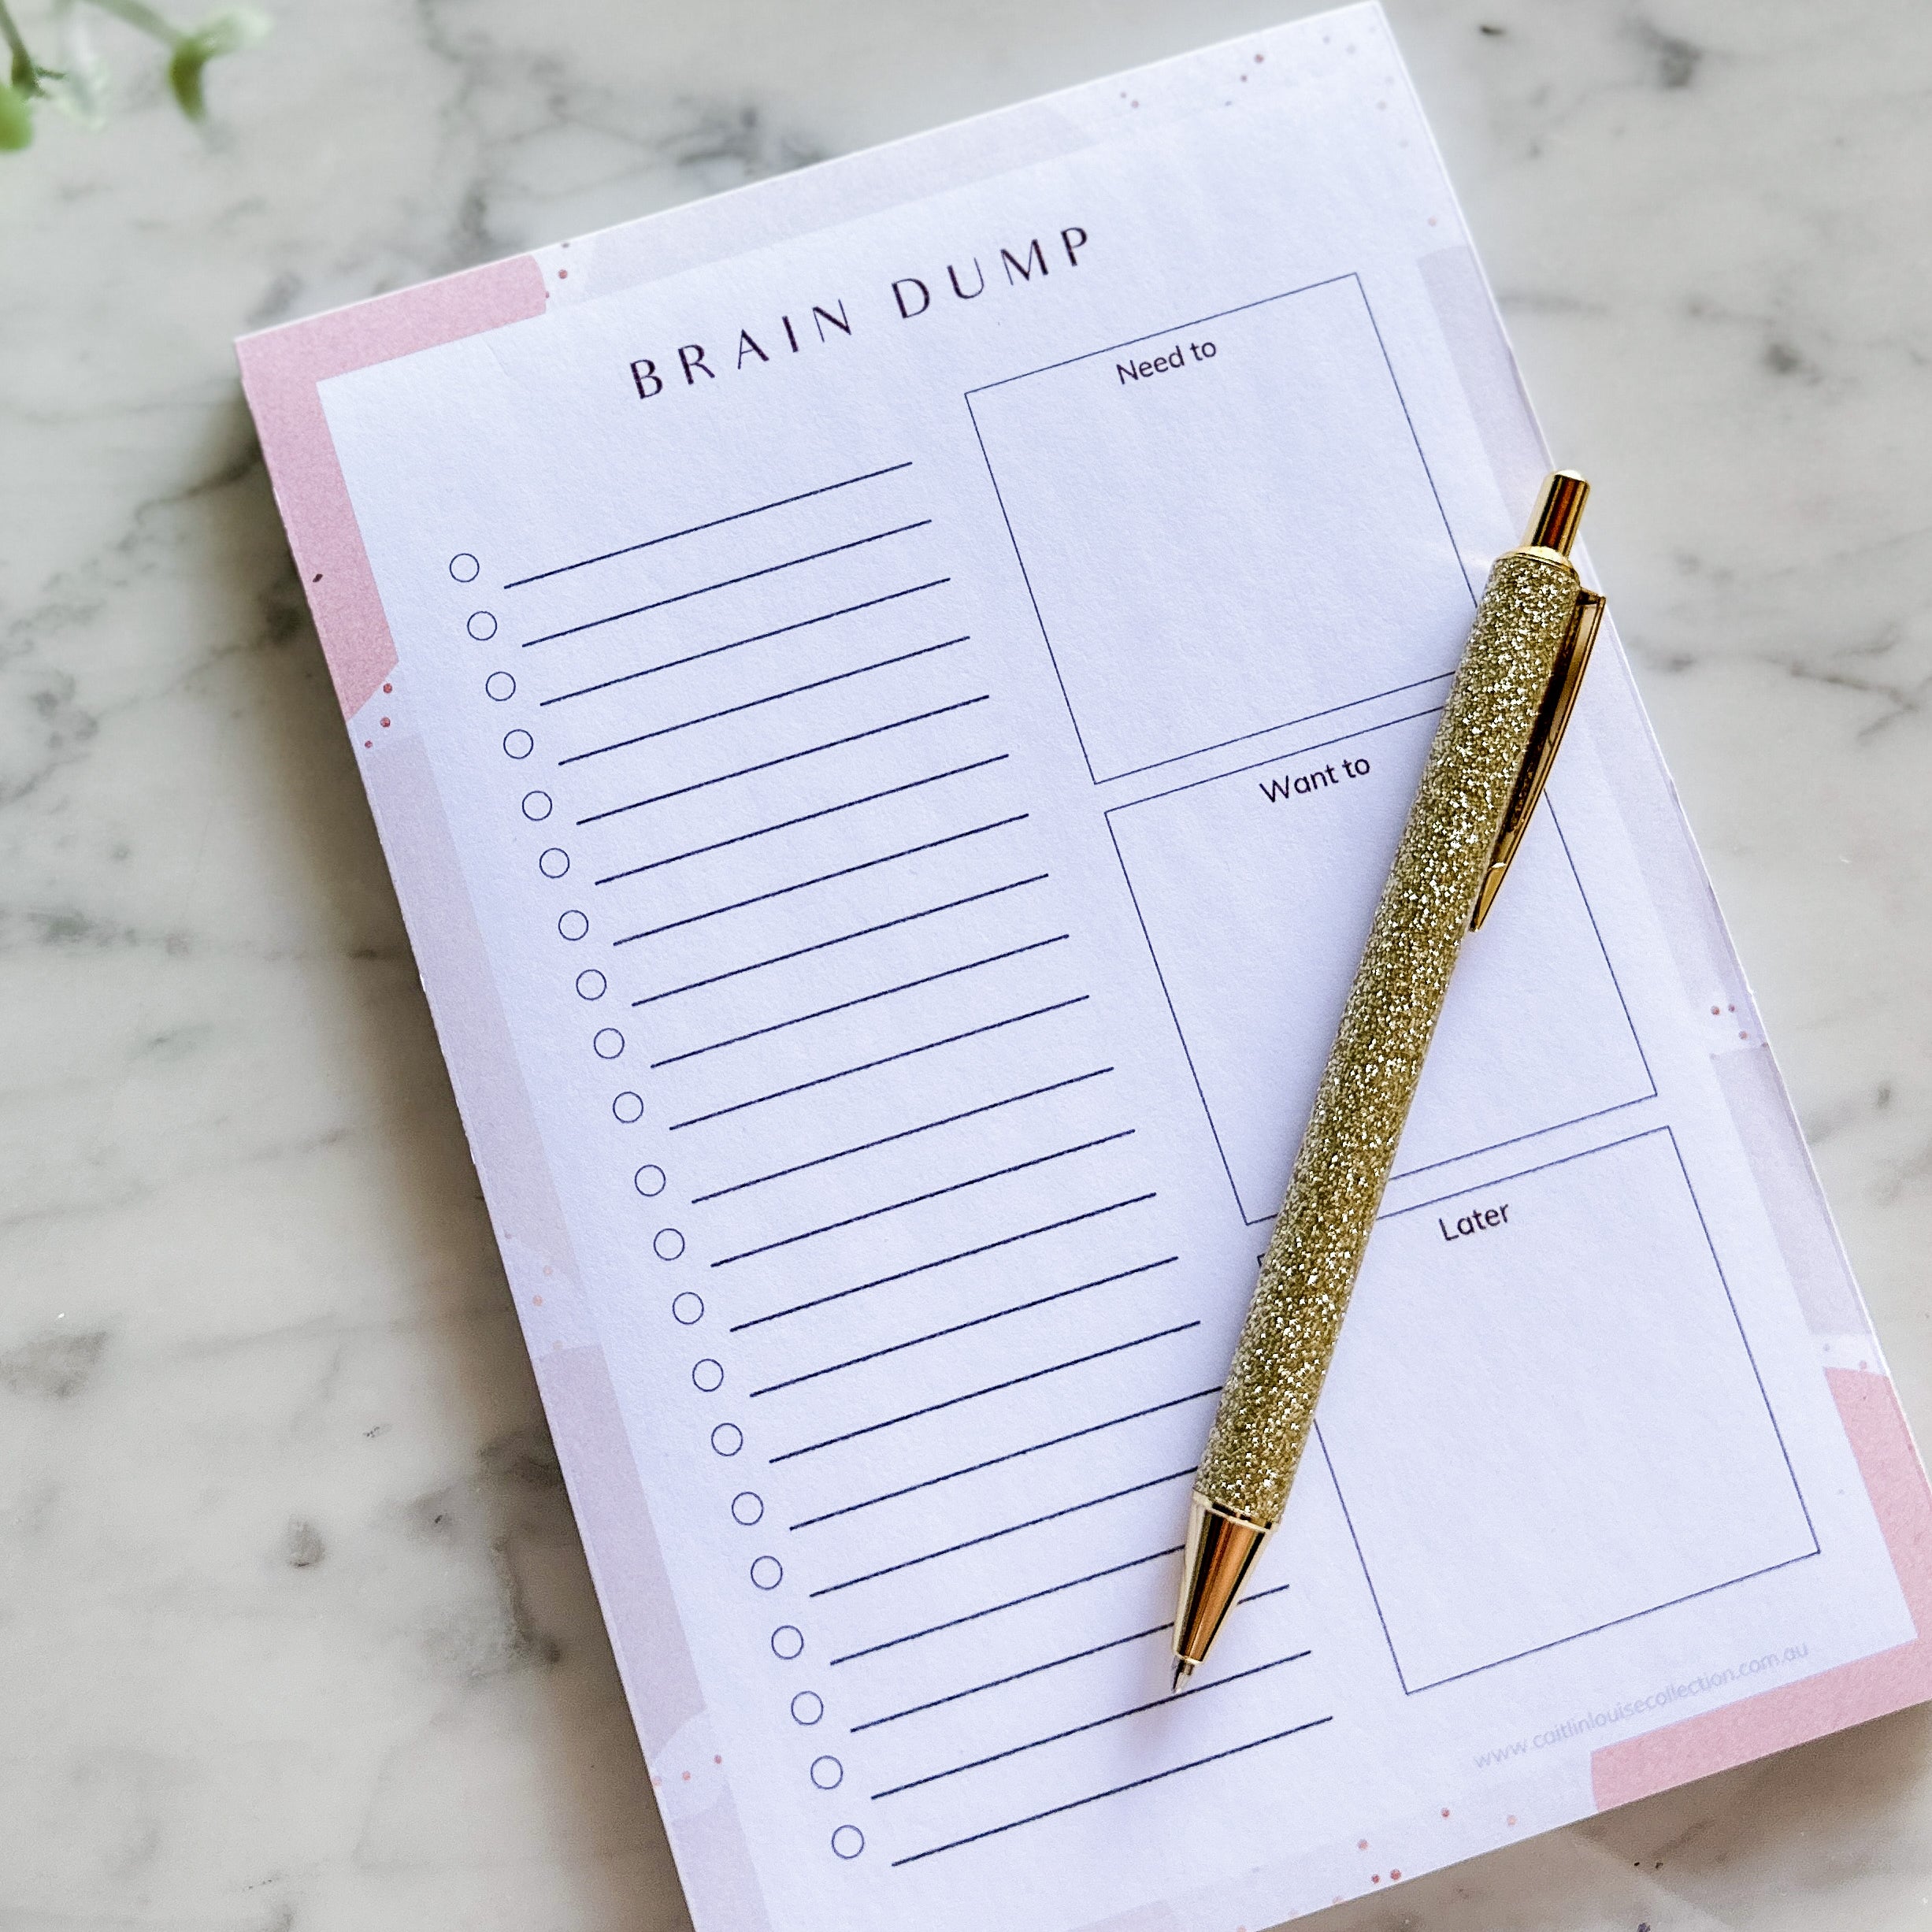 Brain dump notepad for self-care organisation styled on coffee table and pen.